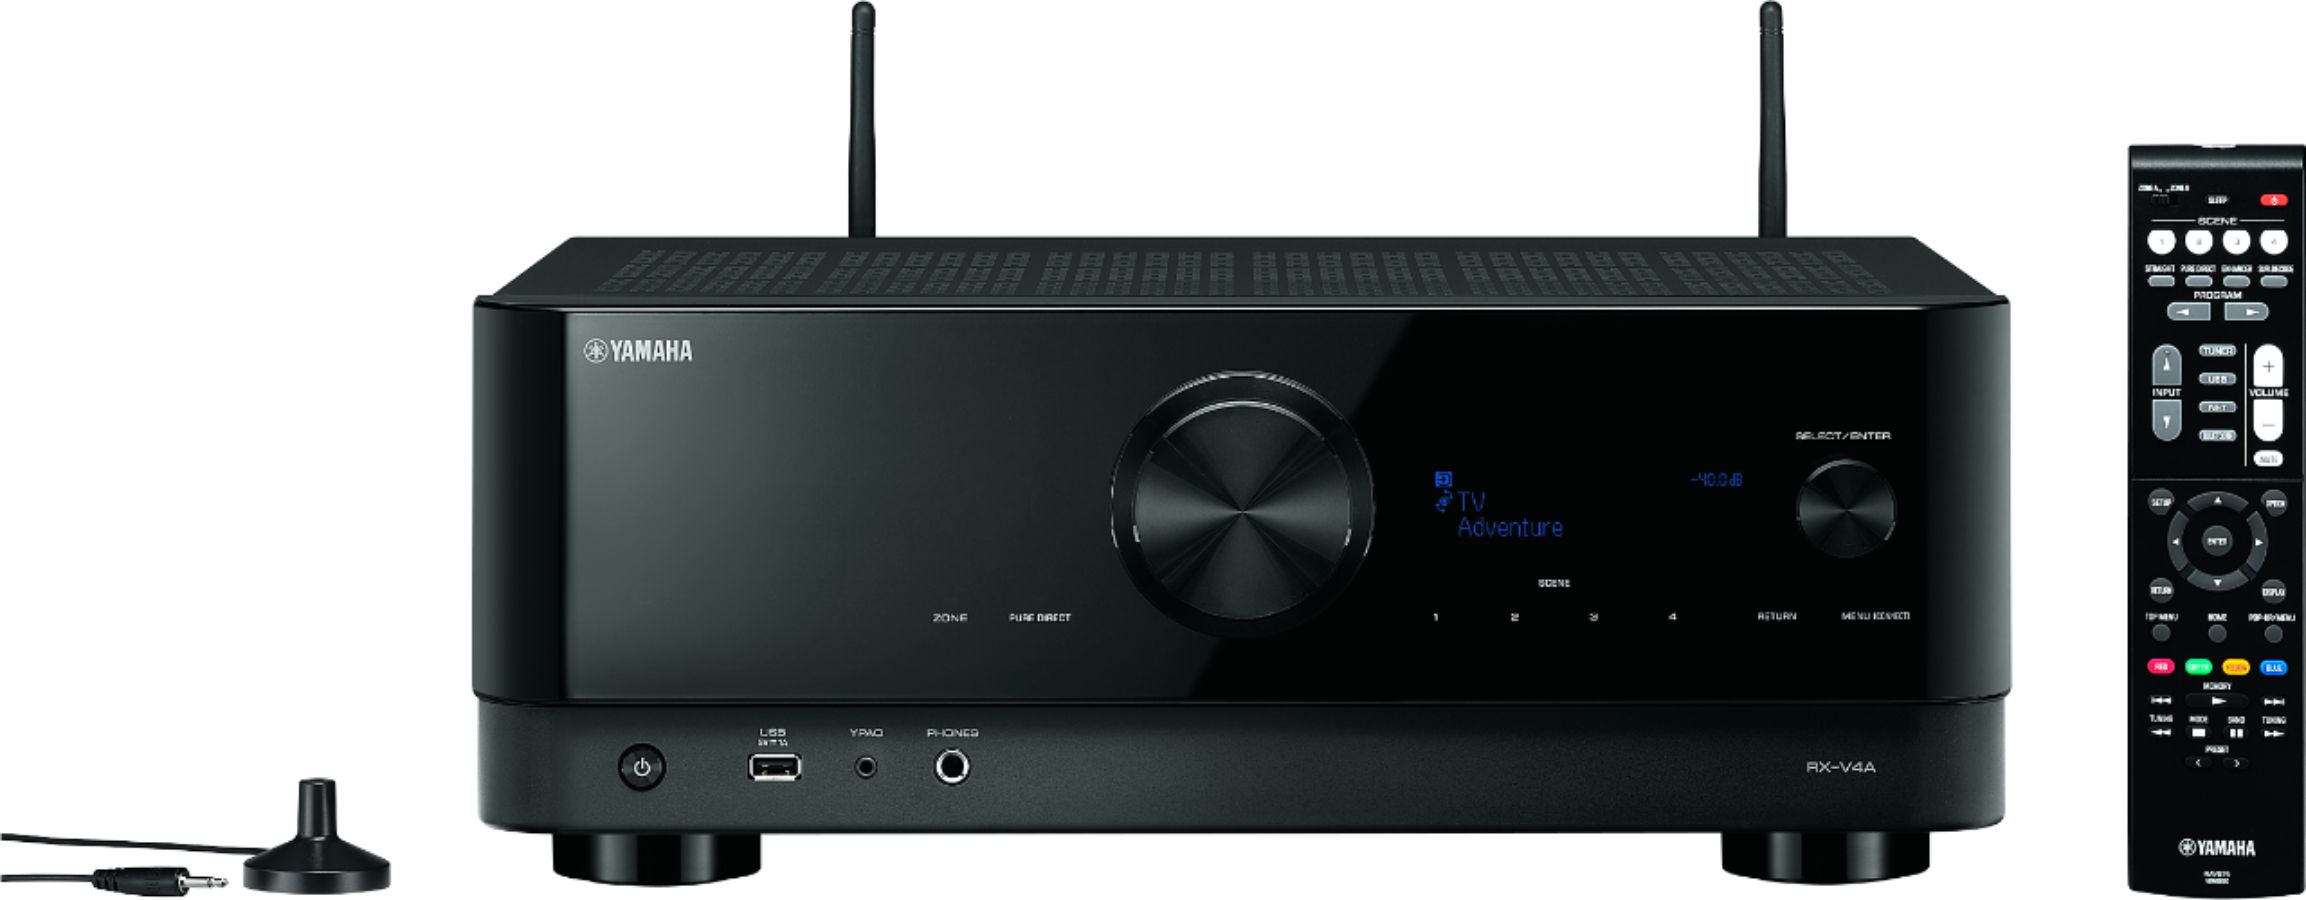 Yamaha RX V4A 5.2 channel AV Receiver with 8K HDMI and MusicCast